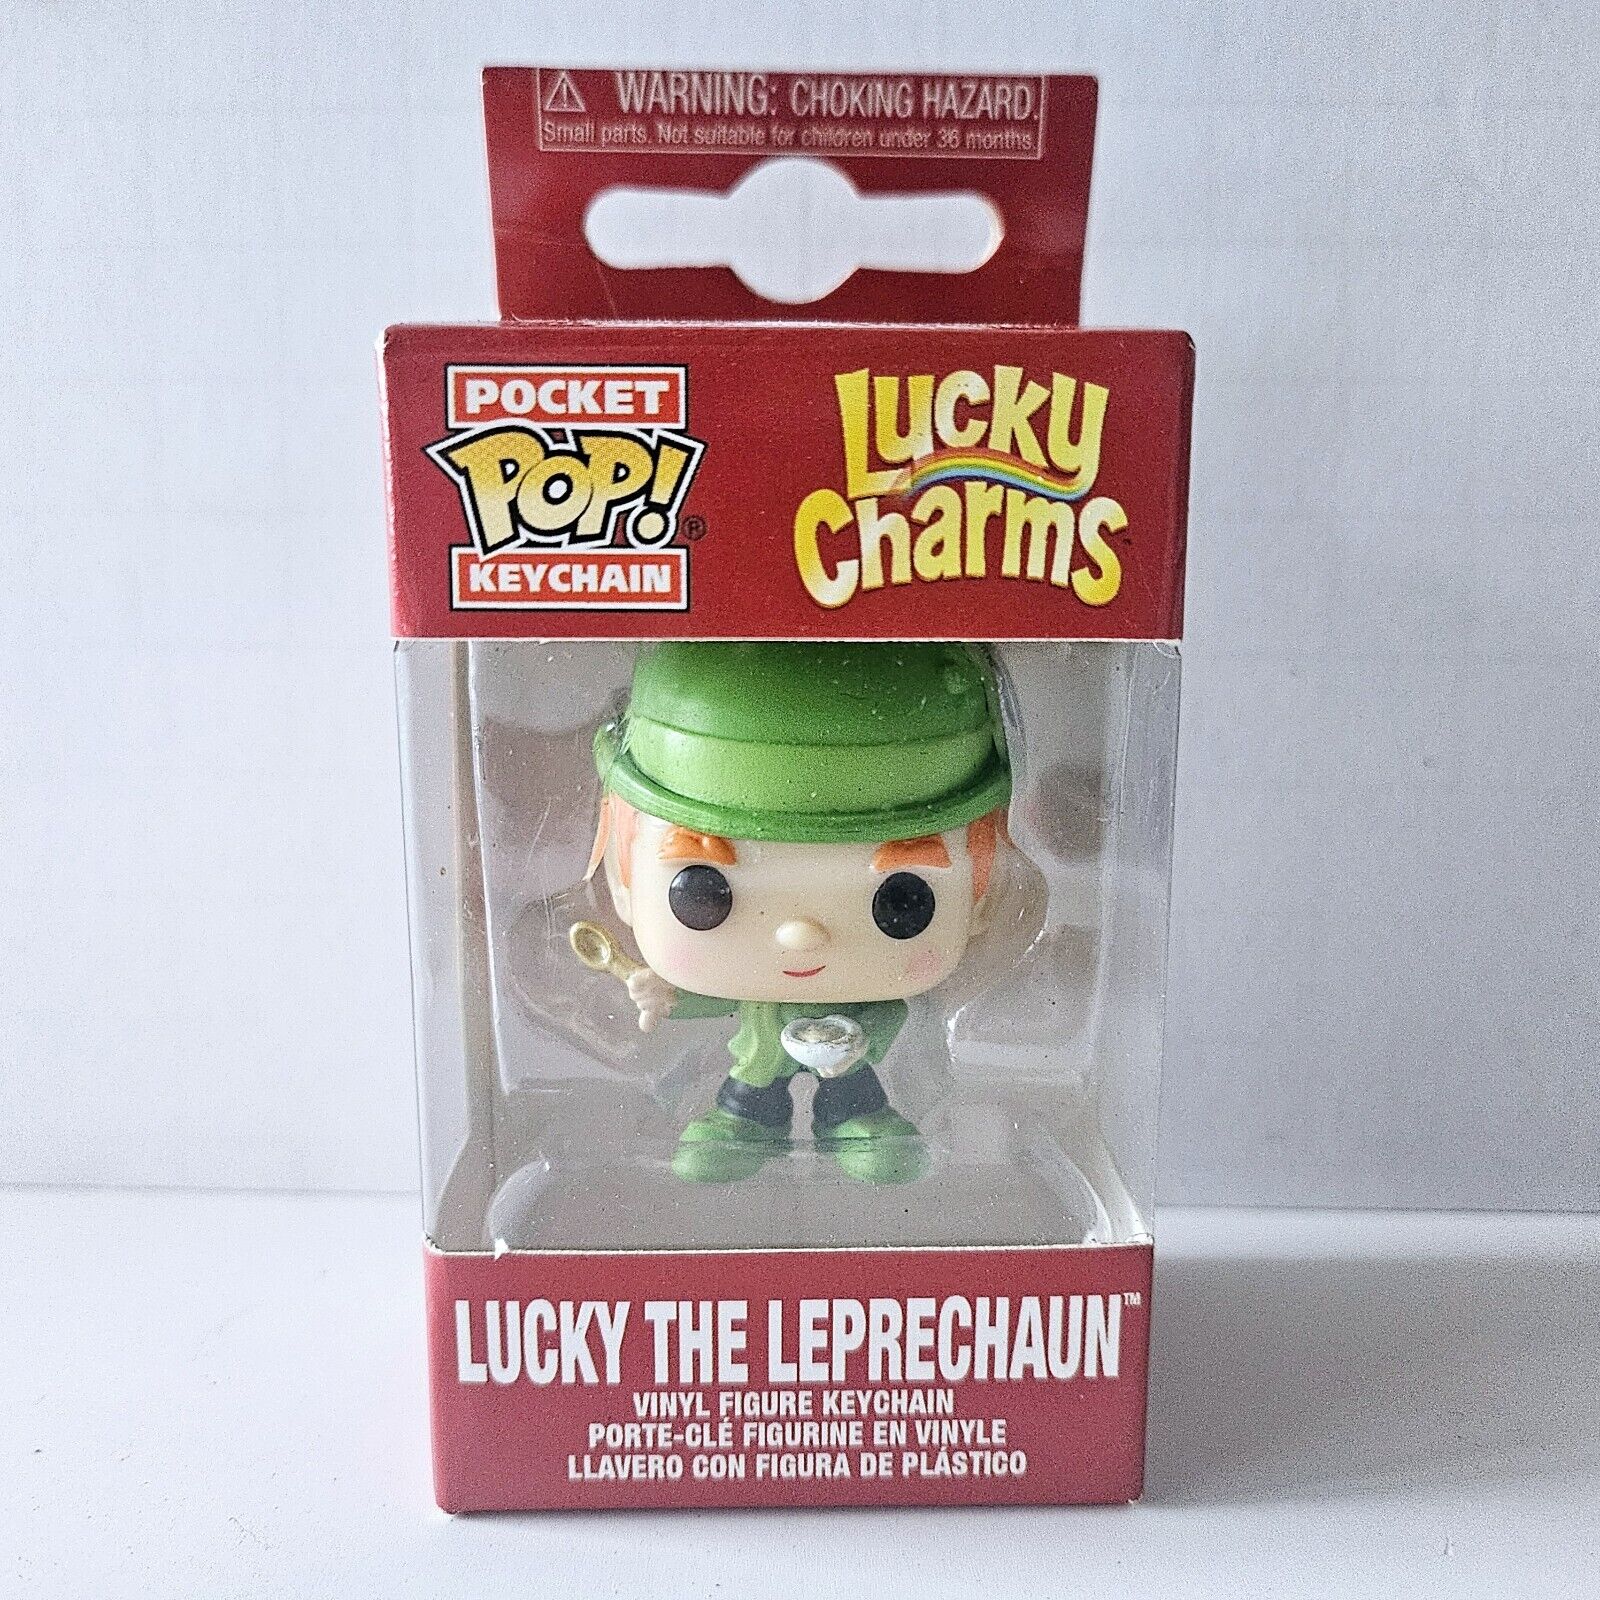 LUCKY CHARMS CEREAL THE LEPRECHAUN FUNKO POCKET POP KEYCHAIN BRAND NEW